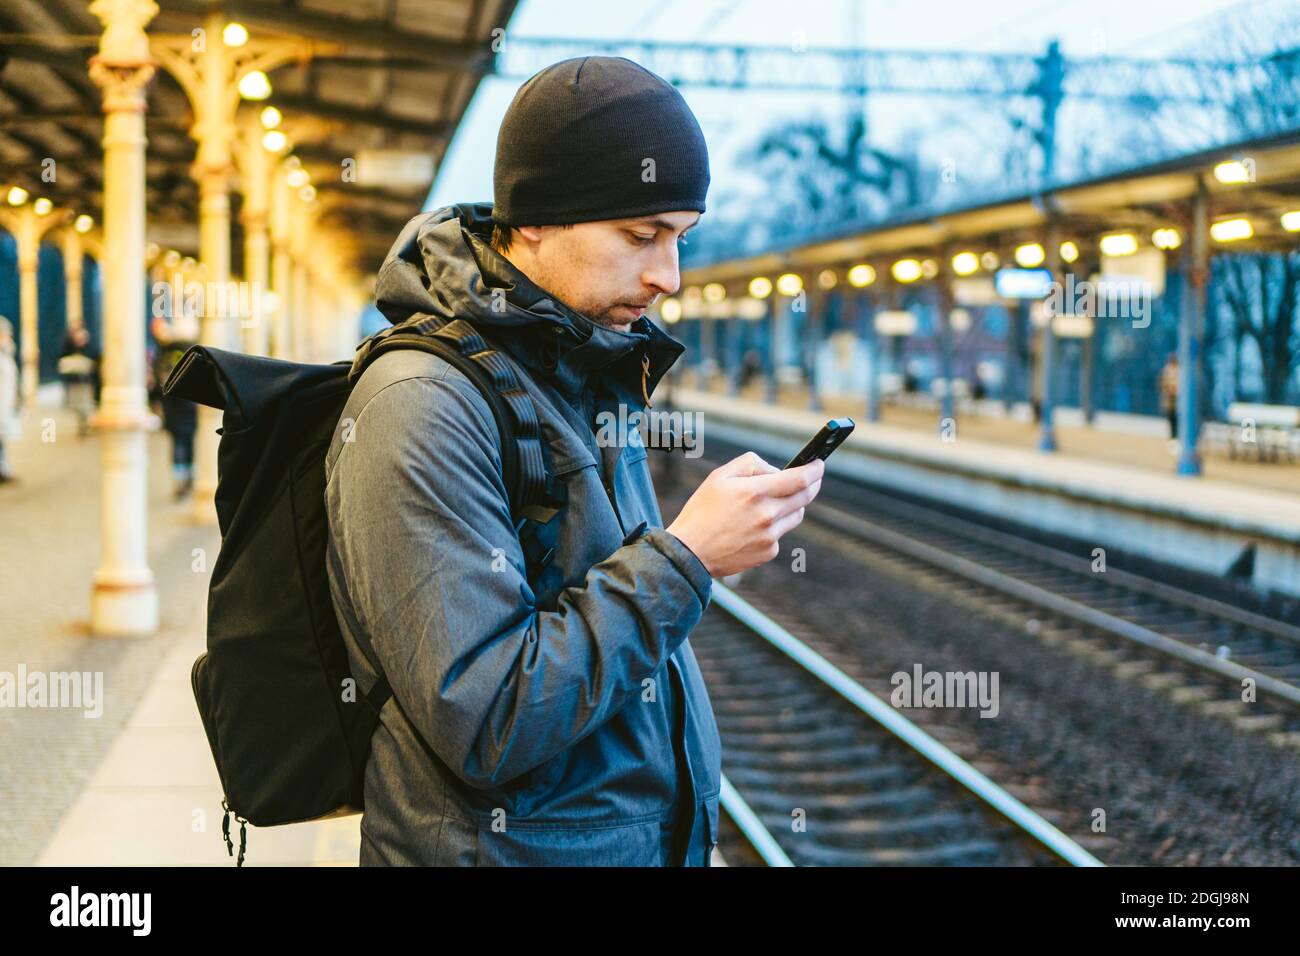 Train Station in Sopot, Poland, Europe. Attractive man waiting at the train station. Thinking about trip, with backpack. Travel Stock Photo